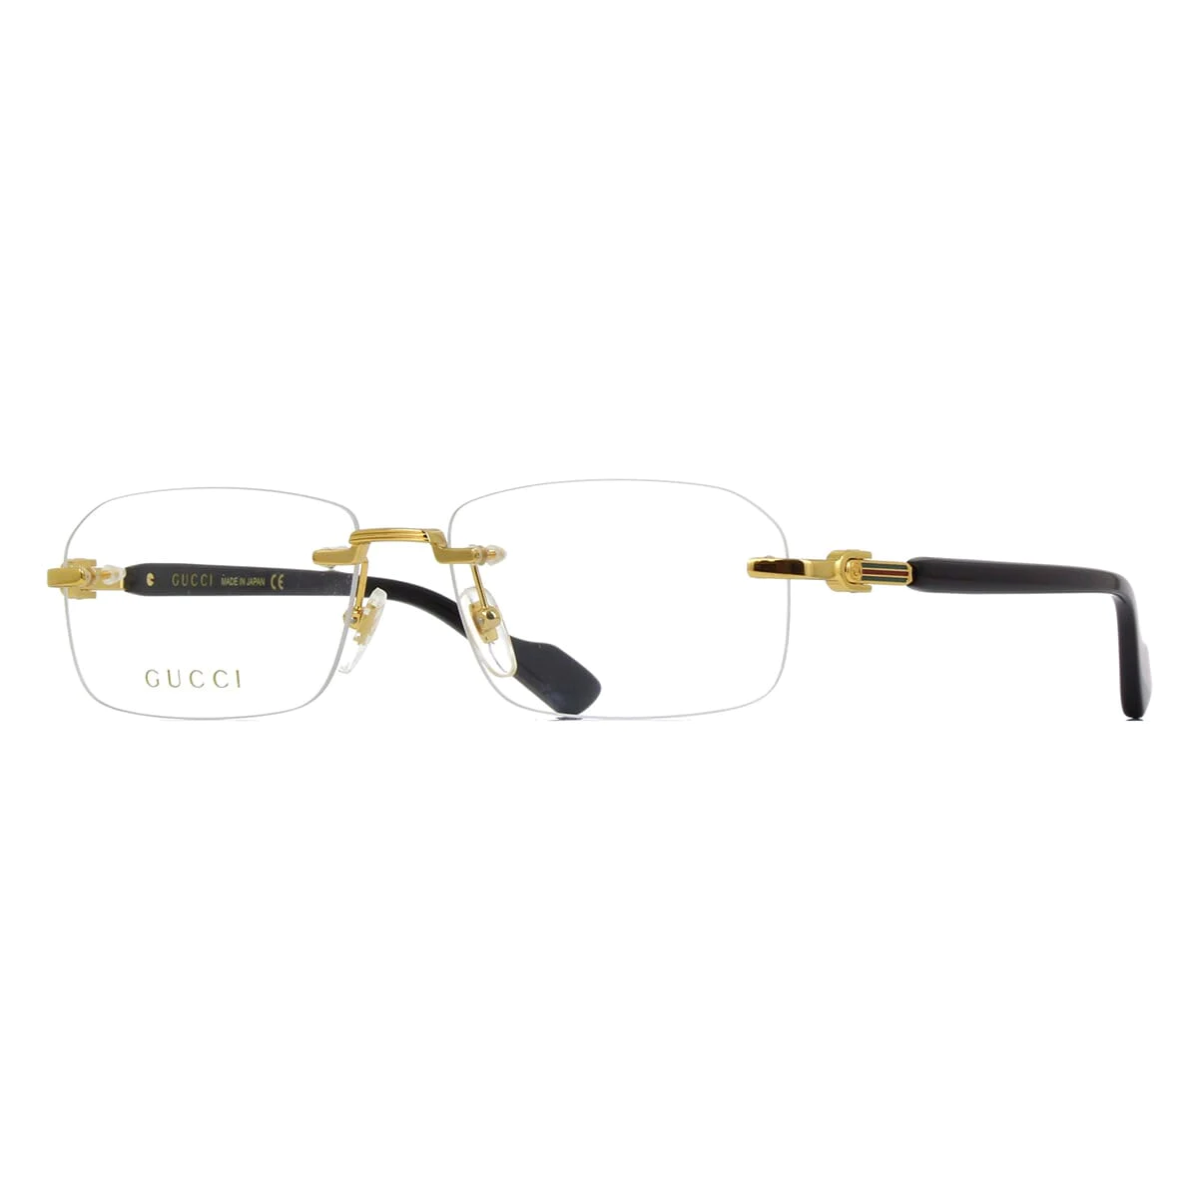 "Stylish Gucci Spectacles - Model 1221O frames suitable for both genders."